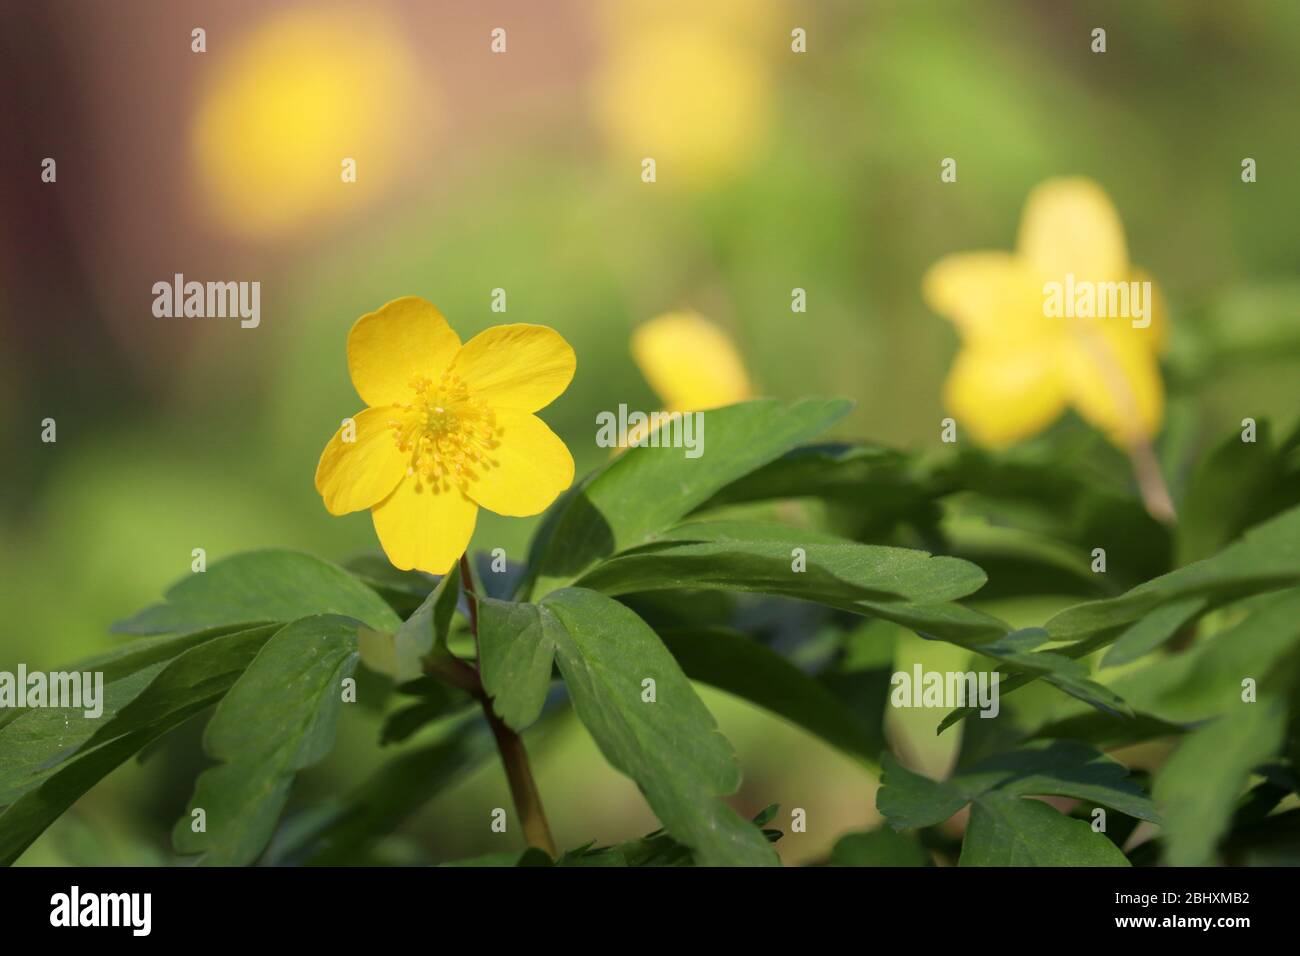 Yellow anemone buttercup in a forest. Spring wild flowers with leaves close up Stock Photo